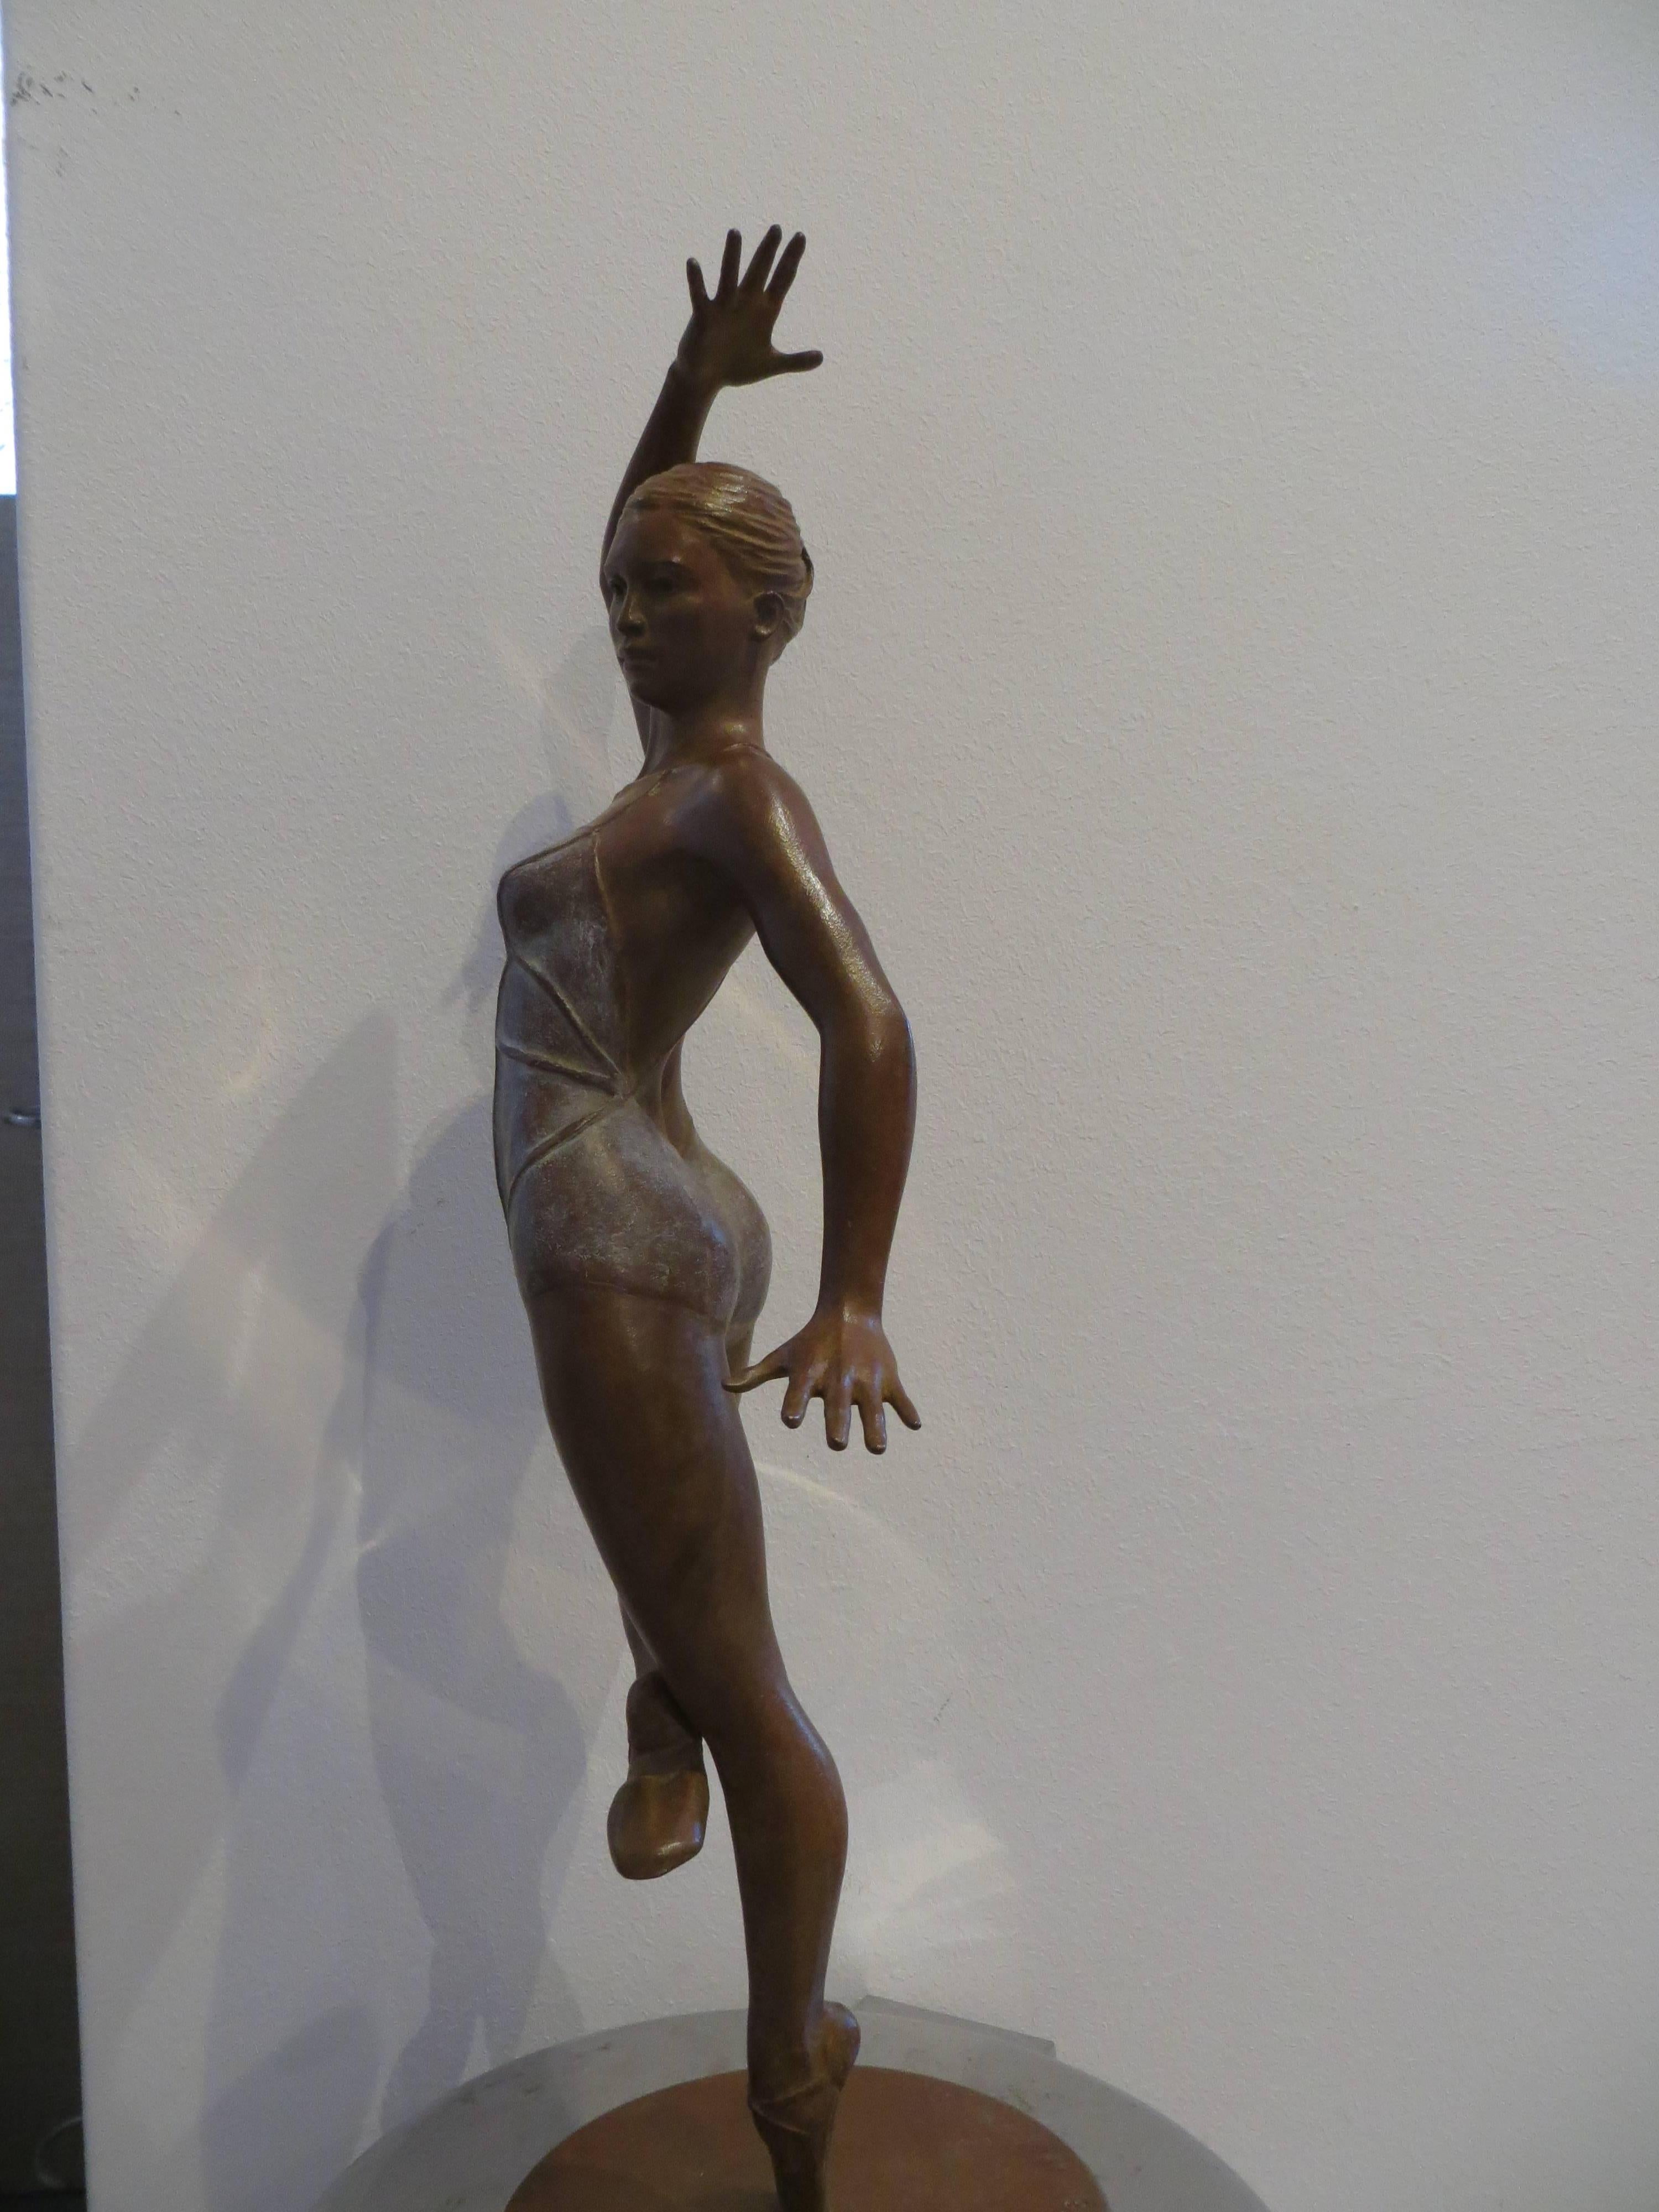 Bronze founder CHAPON 2/8. Lost wax.

Sophie Susplugas lives and works in Paris. From her earliest years she carved busts, hands, dancers and dancers. It all starts with the ground that will be molded and then after several stages, the bronze,